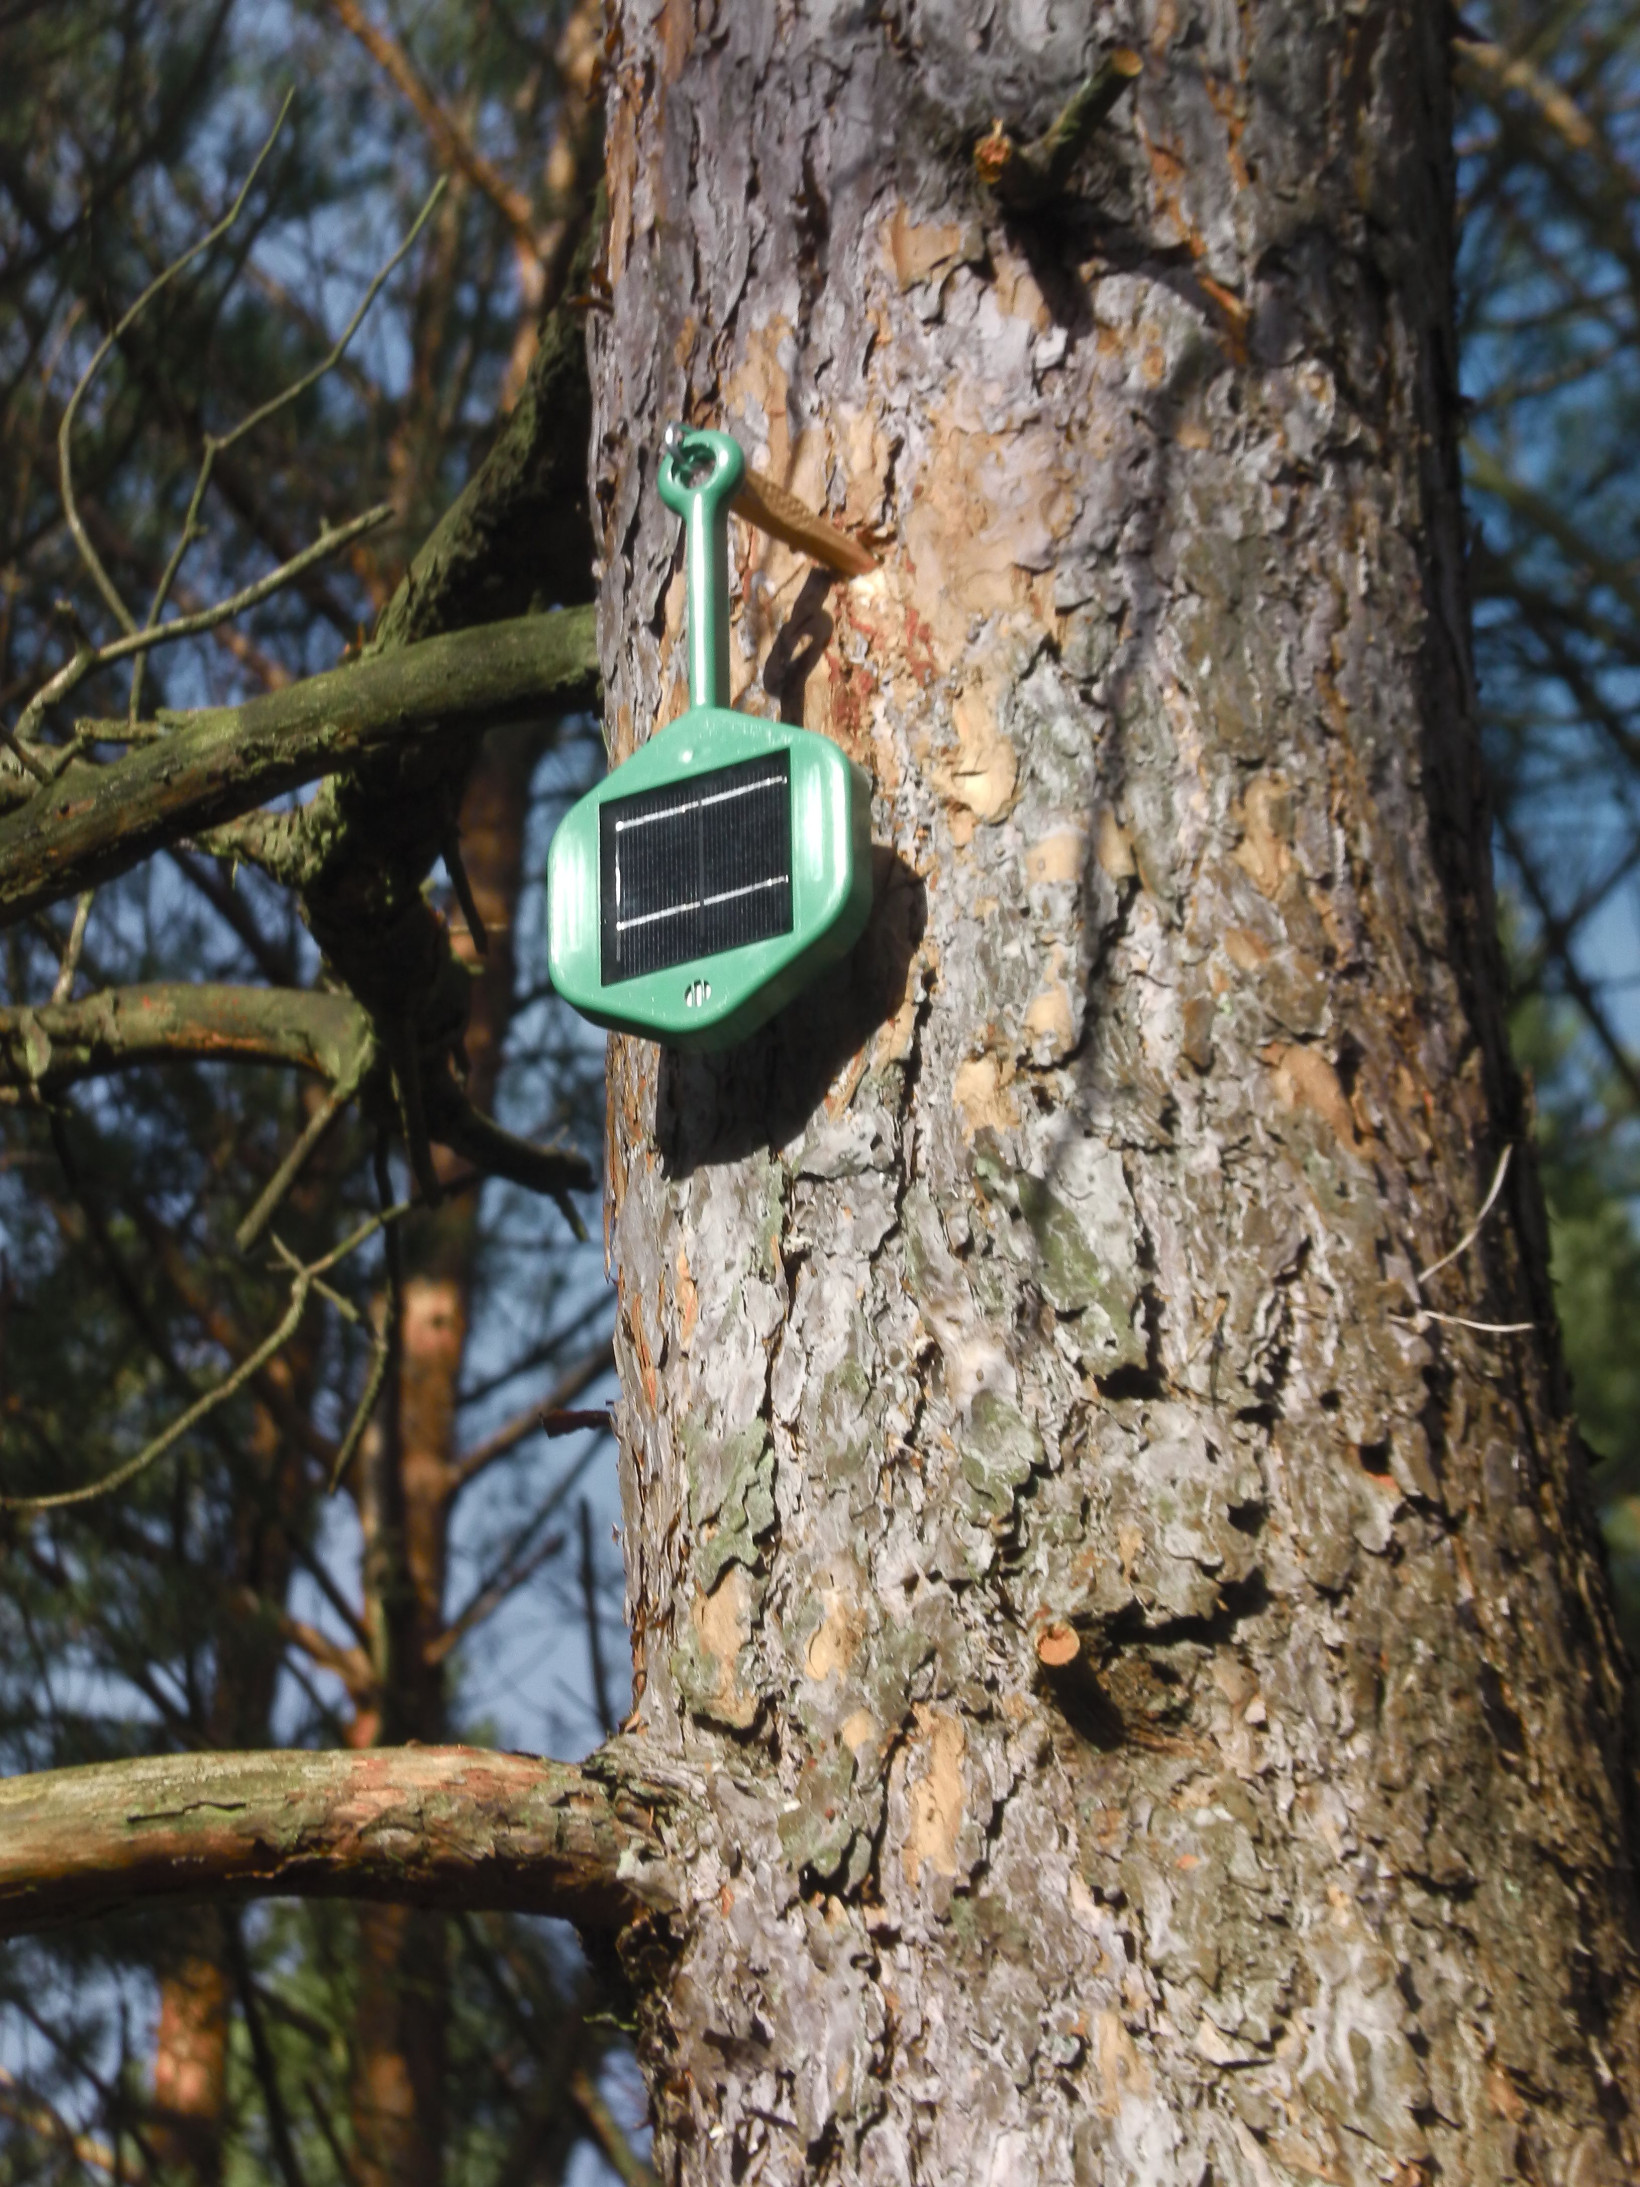 an image of a dryad wildfire sensor hanging on a tree